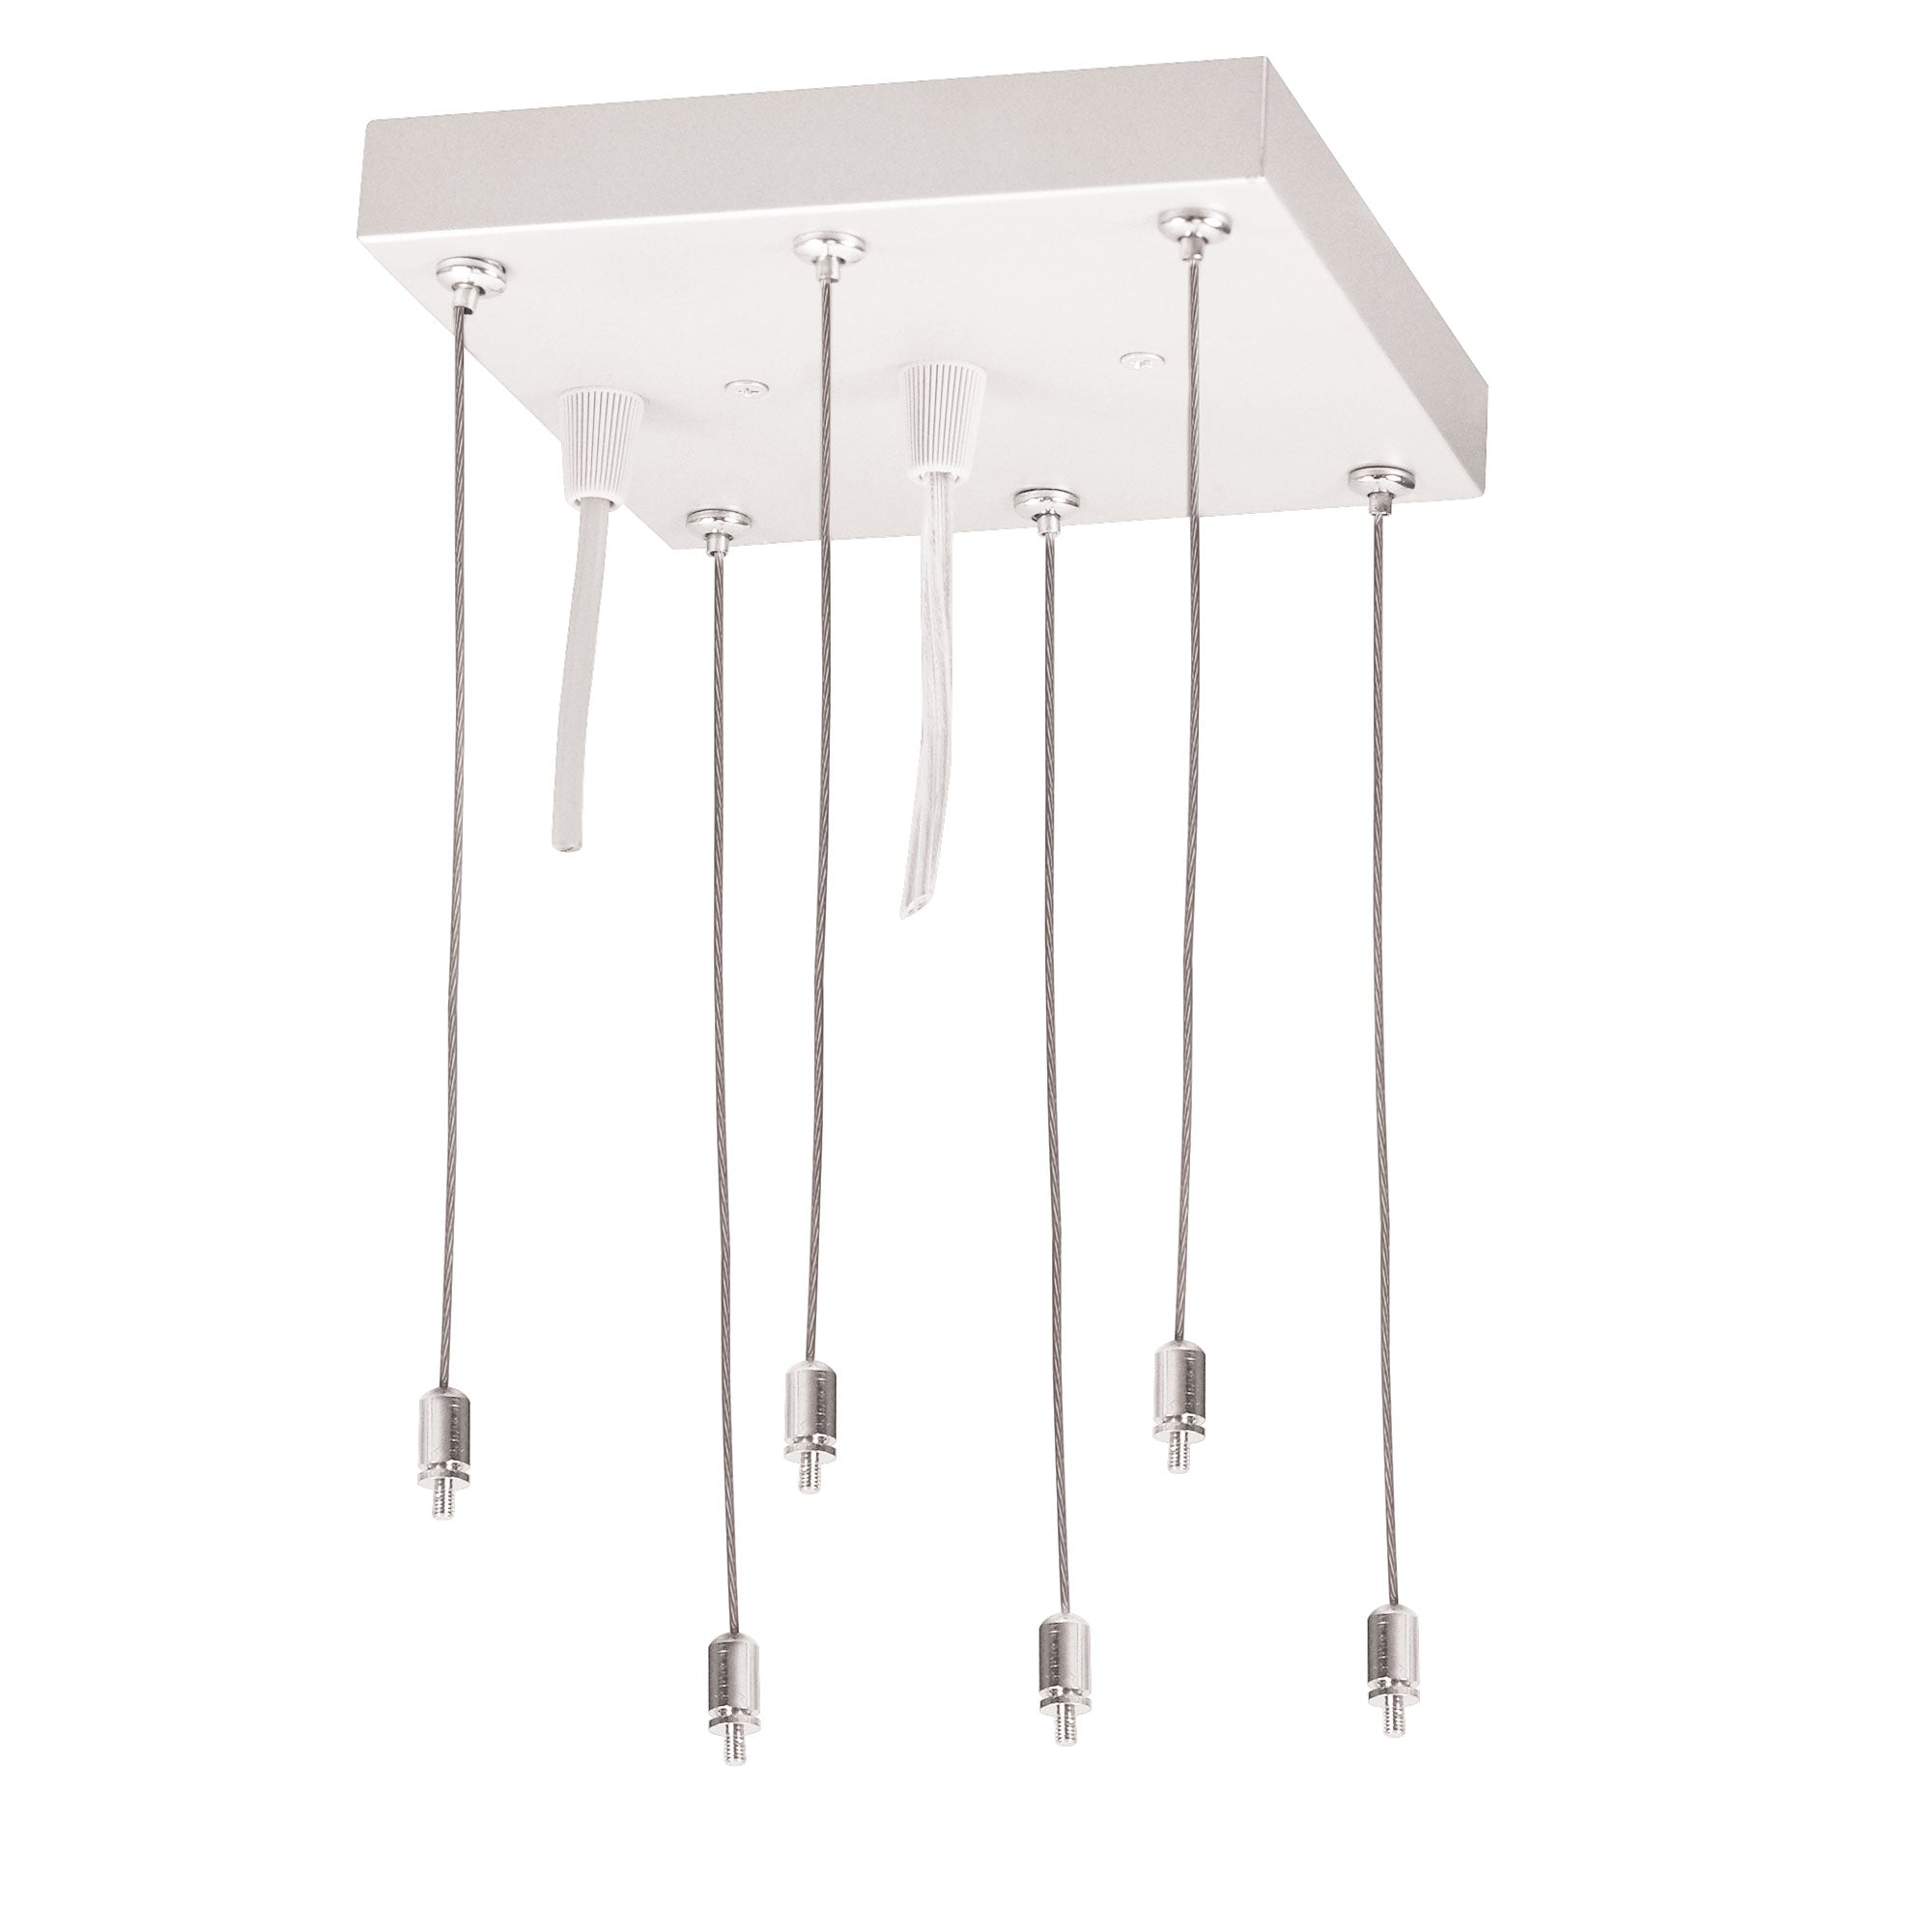 Nora Lighting NPDBL-PKW - Recessed - Pendant Mounting Kit with Canopy for LED Back-Lit Panels, White